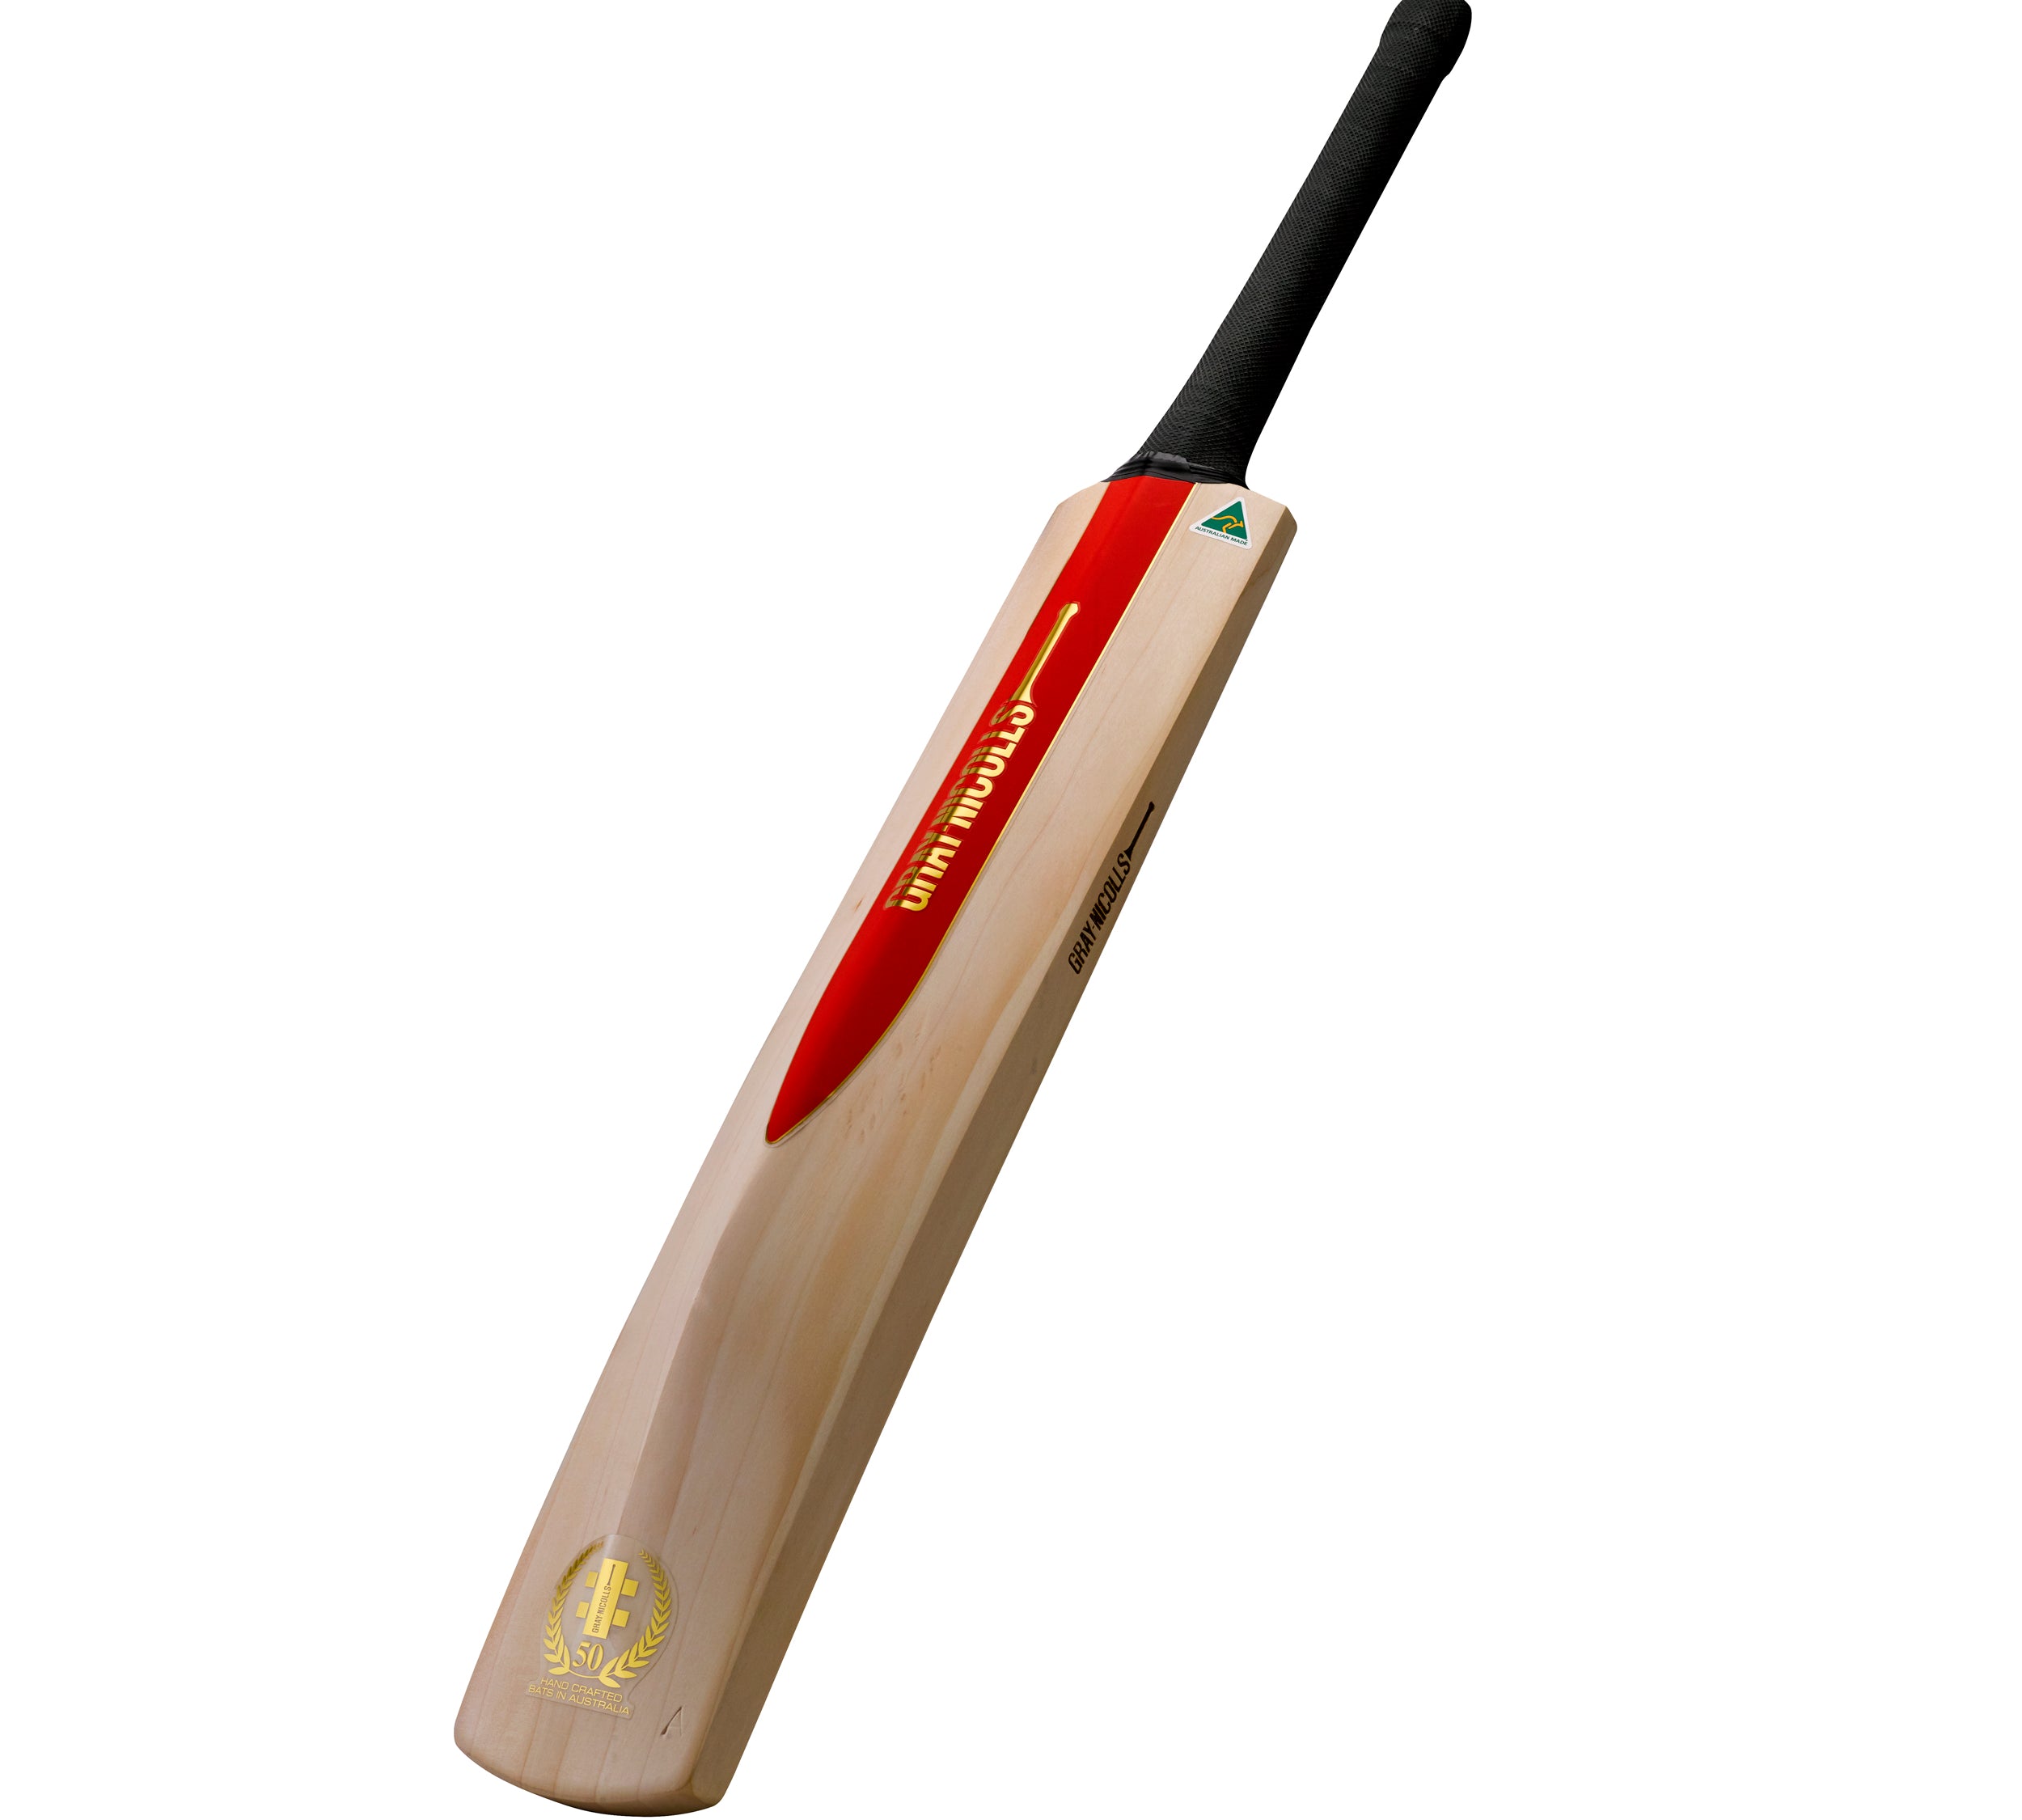 50th Edition cricket Bat by GN